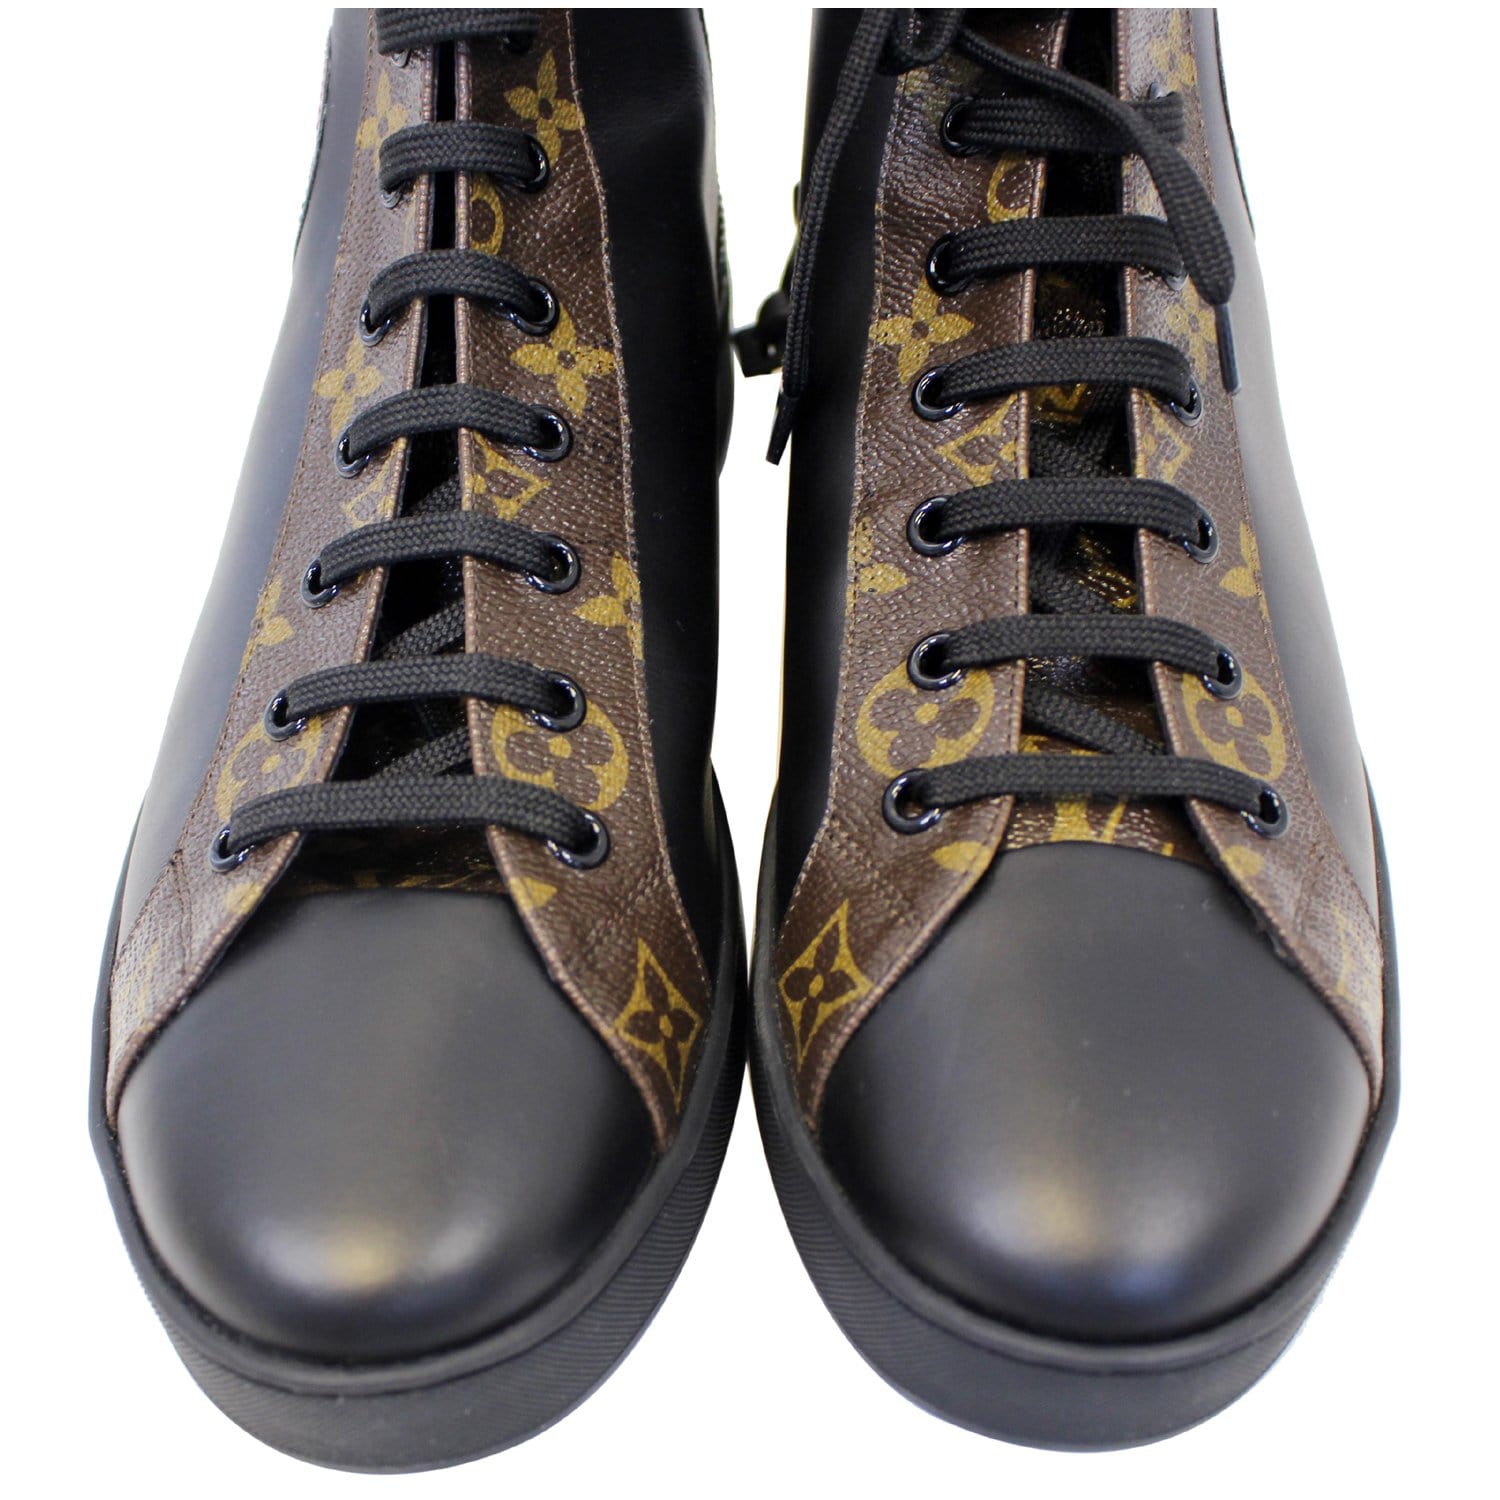 Louis Vuitton Back Leather Monogram Canvas High-Top Sneakers